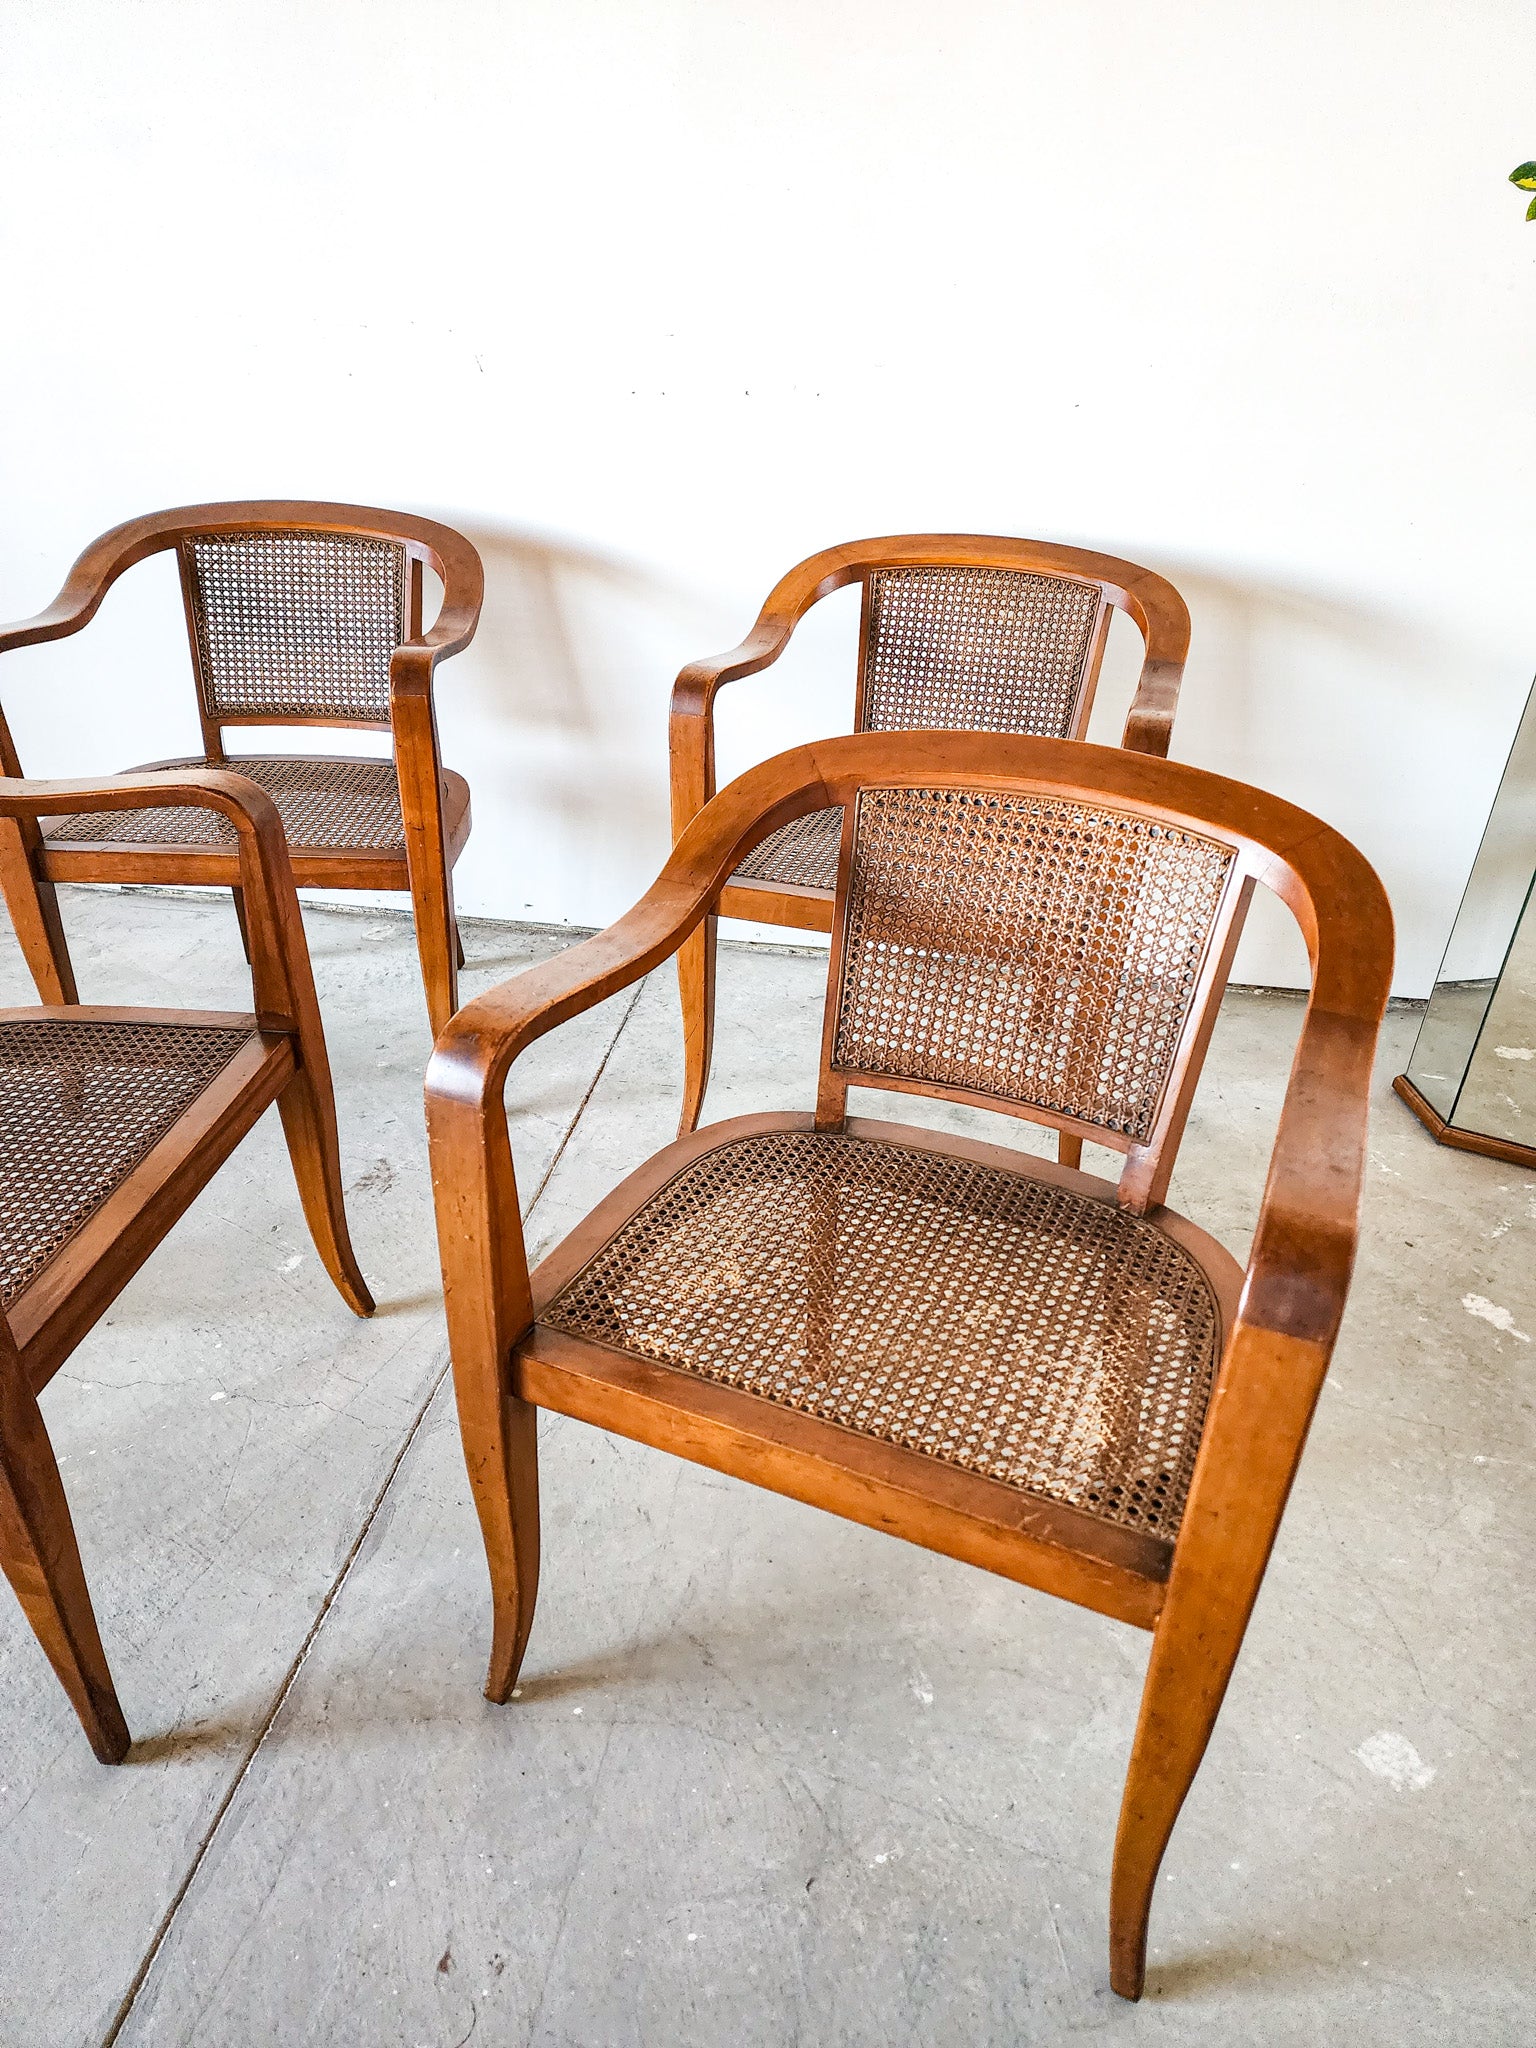 Cand & Walnut Edward Wormley Style Chairs - Reclaimed Mt. Goods